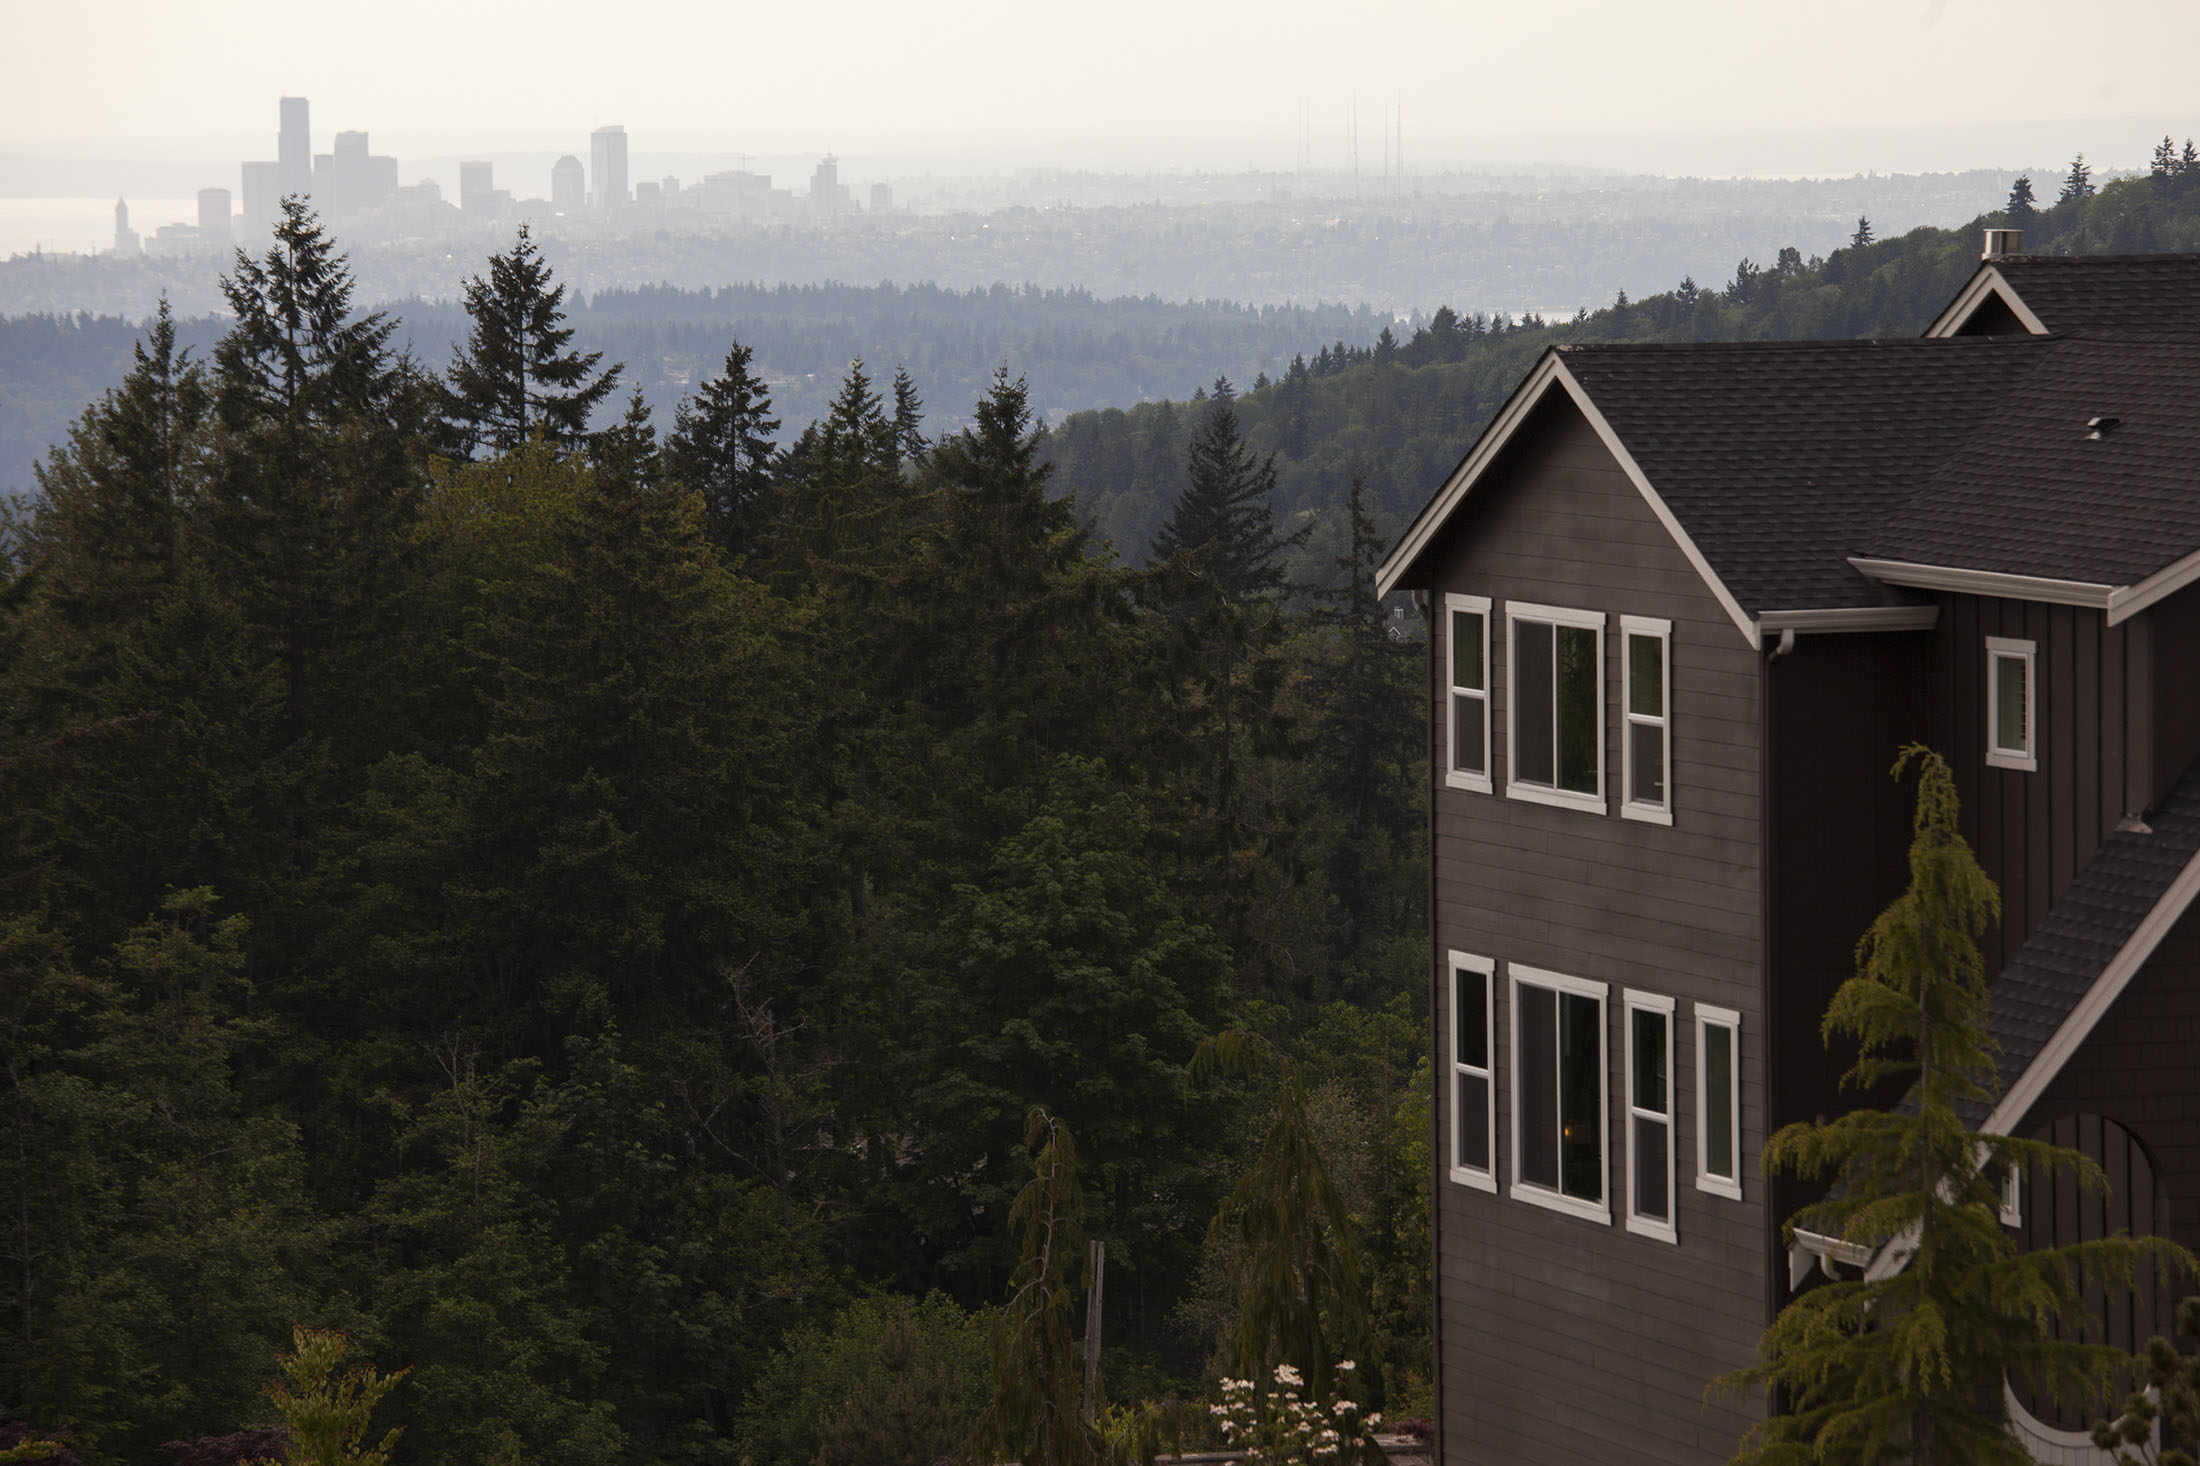 A view of Seattle is seen from the balcony of a house in Bellevue, Washington.
